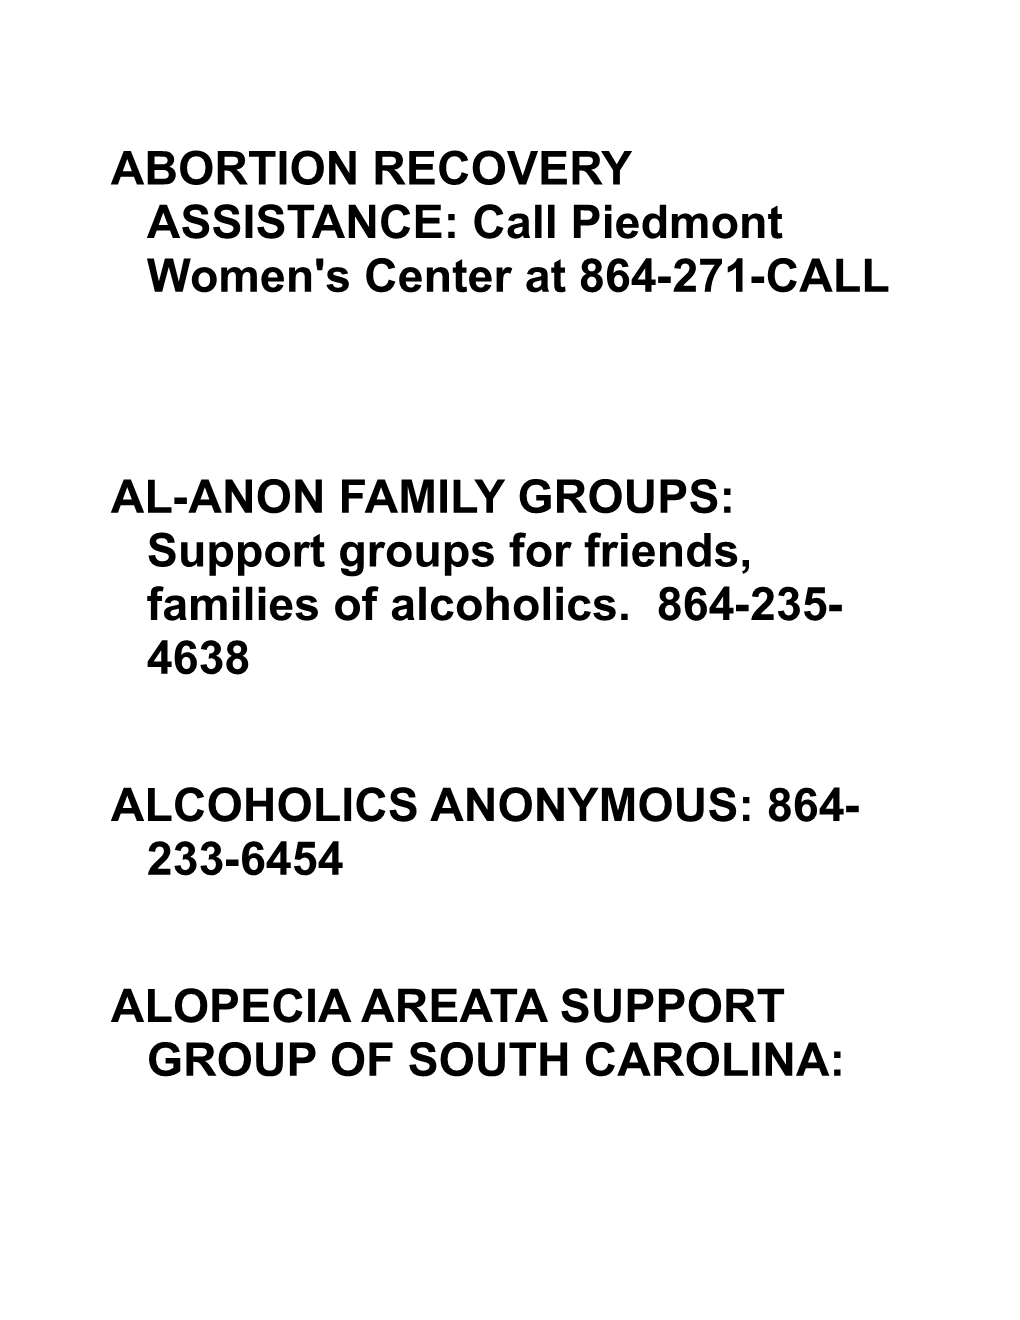 ABORTION RECOVERY ASSISTANCE: Call Piedmont Women's Center at 864-271-CALL